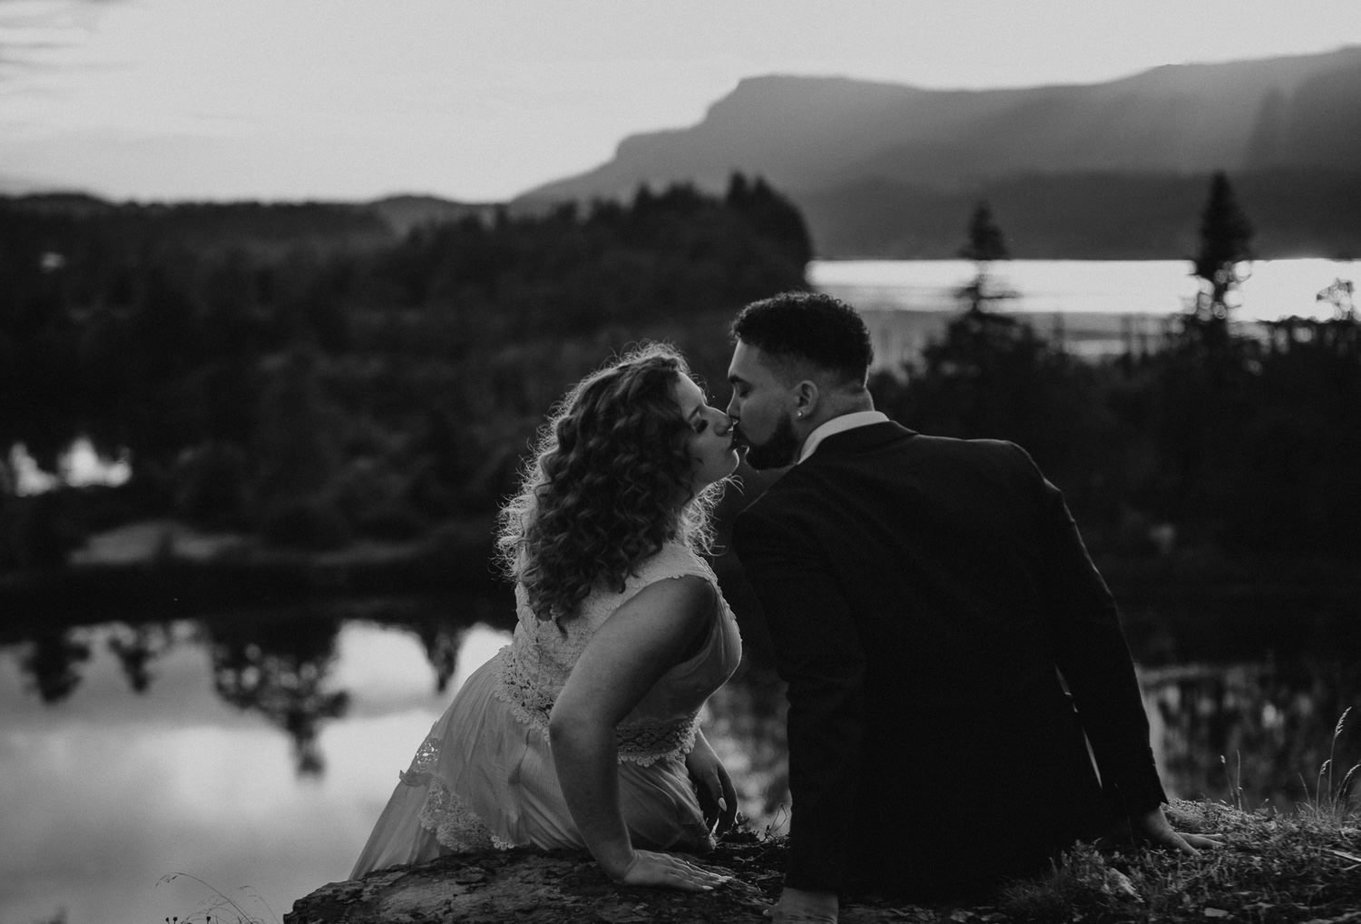 Government Cove Oregon adventure elopement in the Columbia River Gorge. Black and white image of couple sitting on the edge of the cliff at sunset. The mountains and trees reflect in the rivers surface. Bride leans in to kiss the groom gently